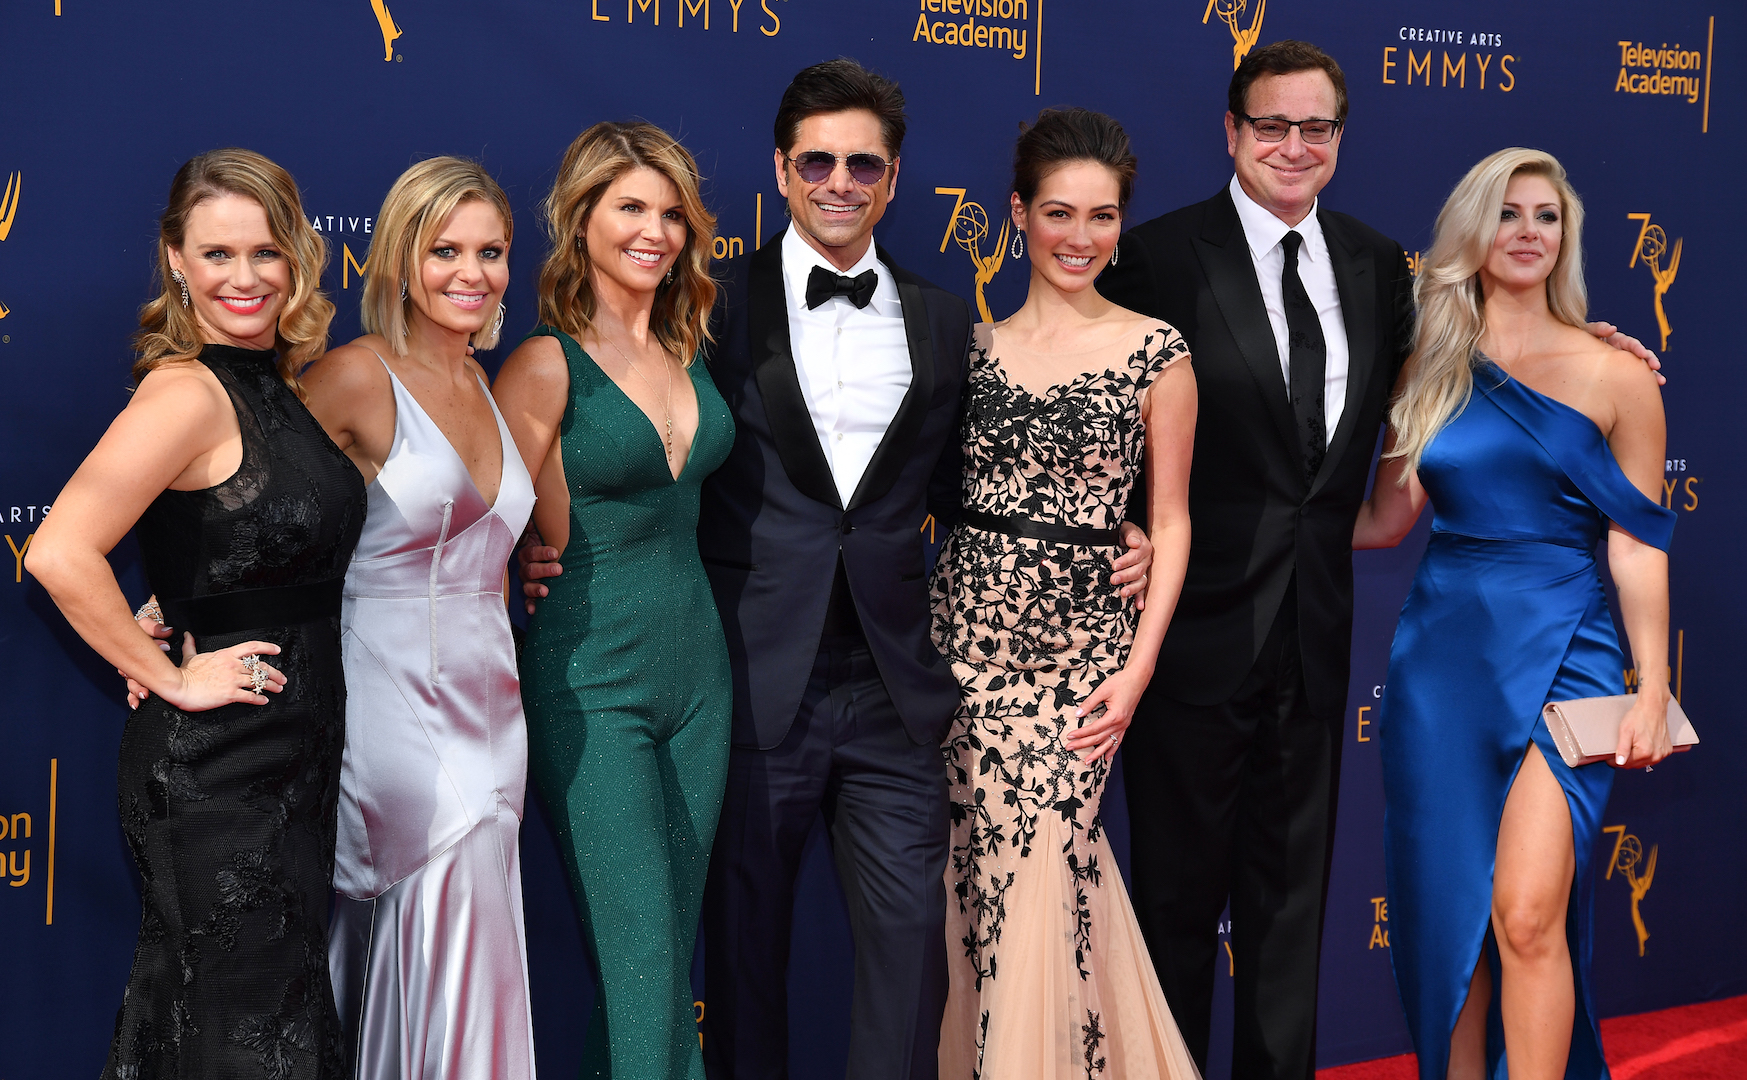 Fuller House Cast 4chion Lifestyle Emmys